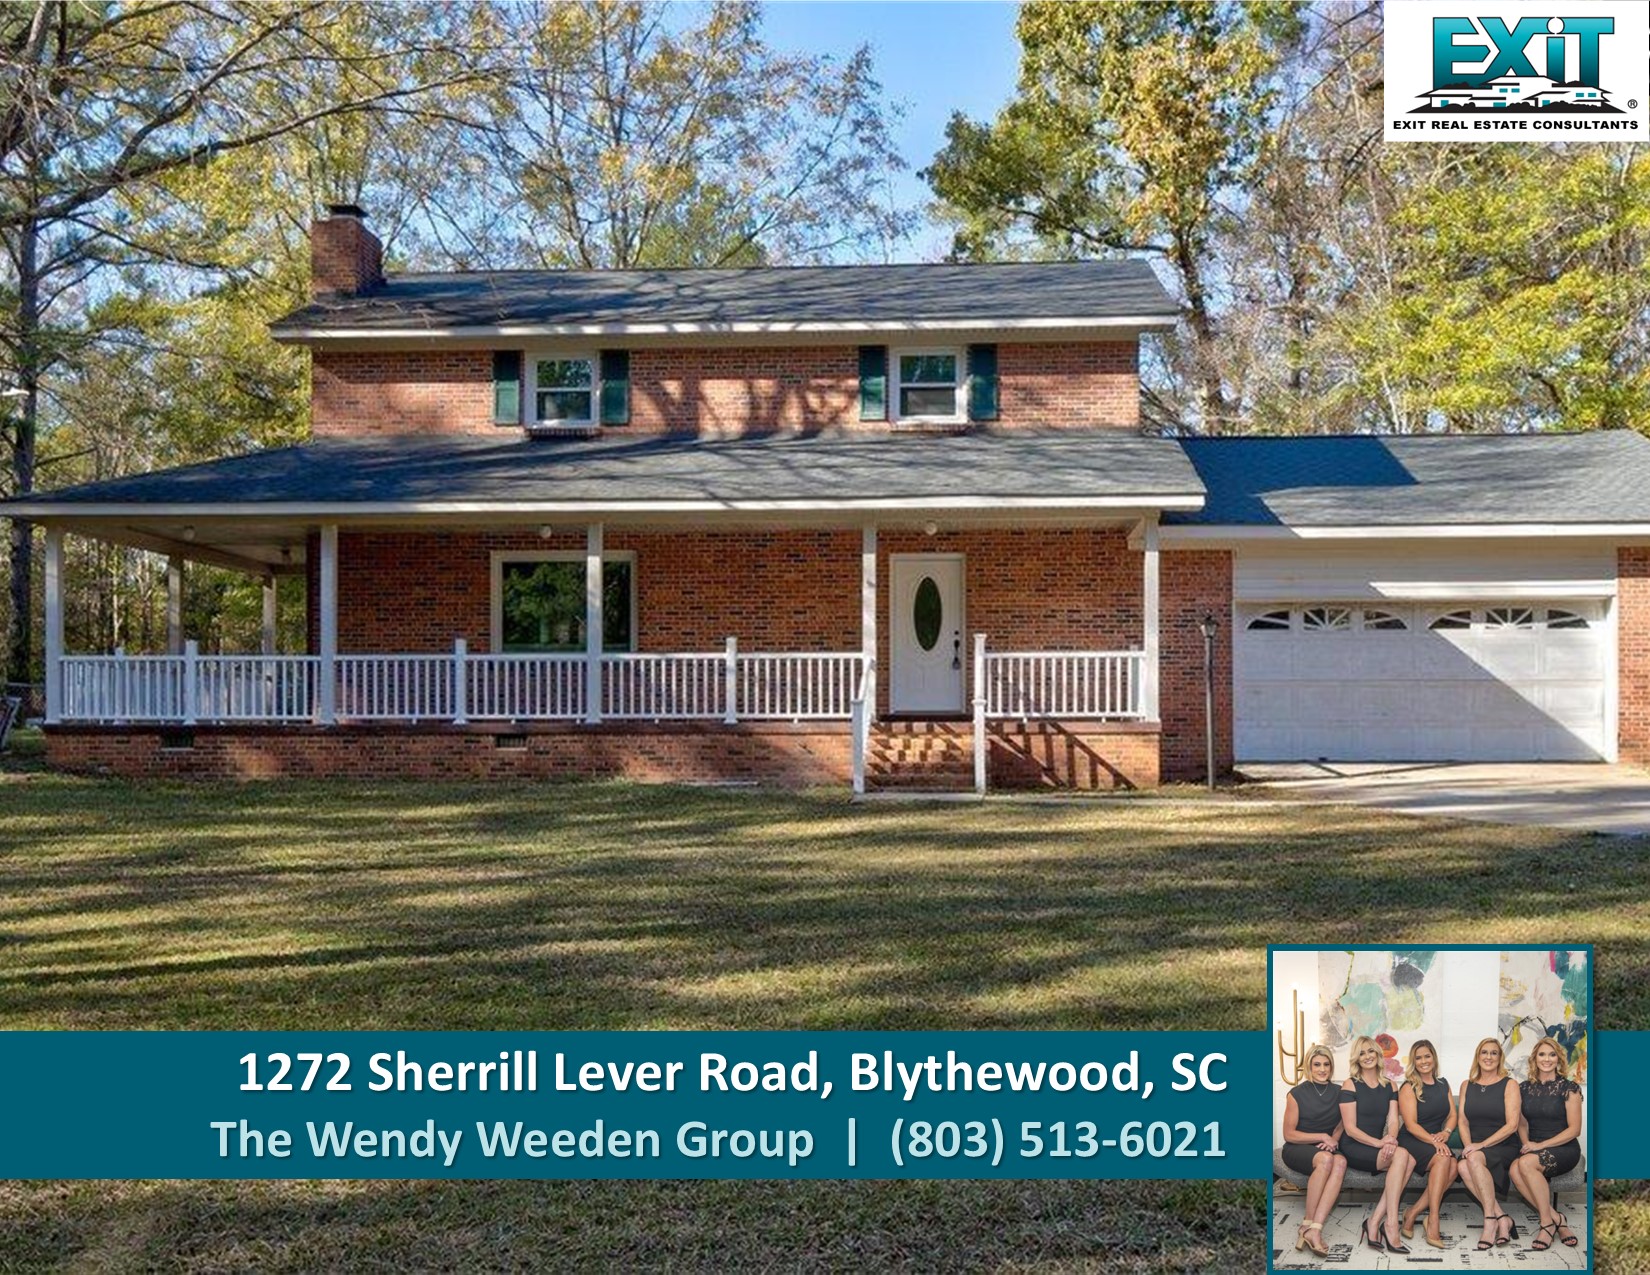 Just listed in Blythewood